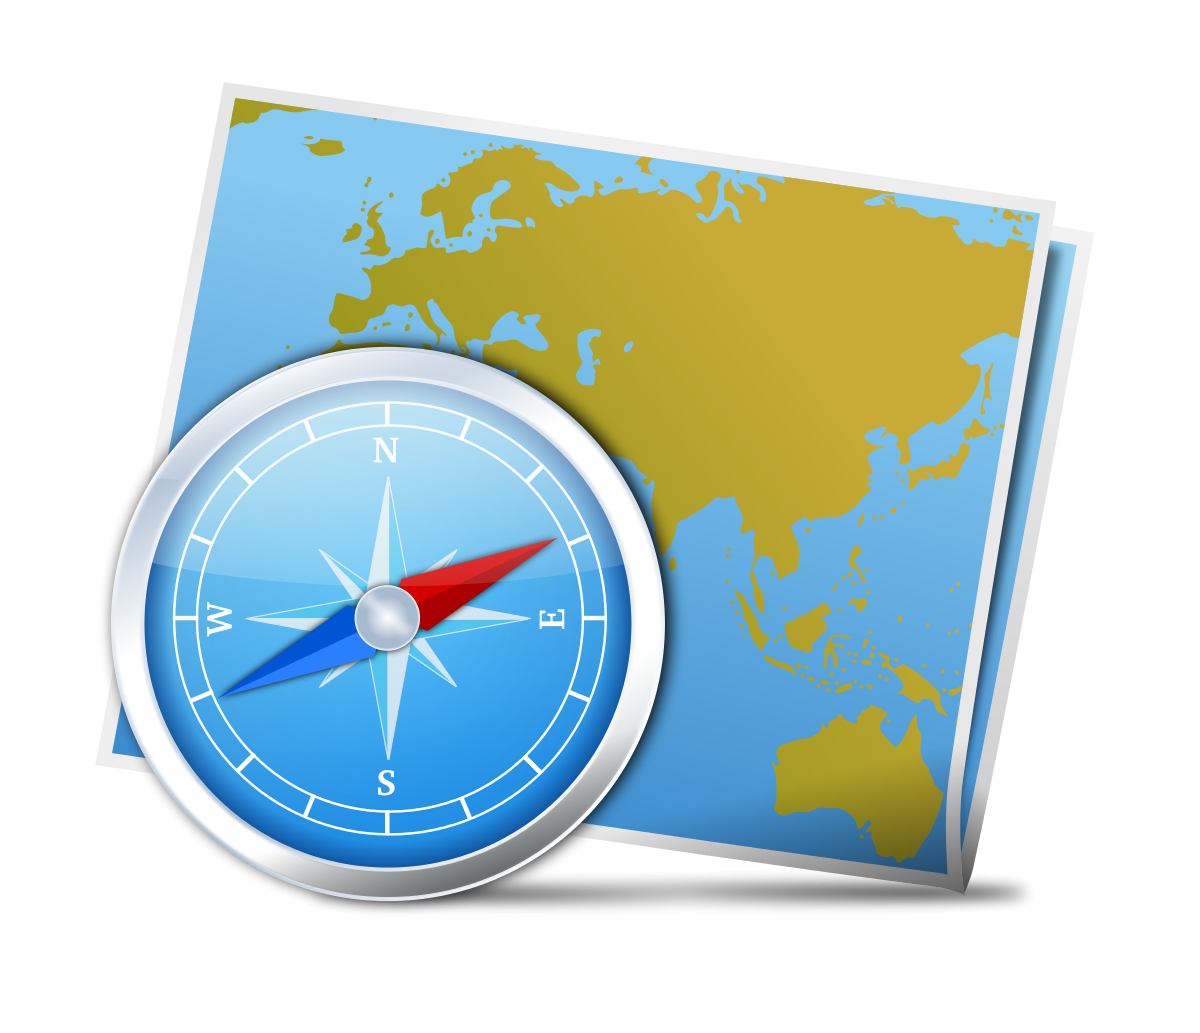 Map And Compass Clipart by gnokii : Map Cliparts #13213- ClipartSE